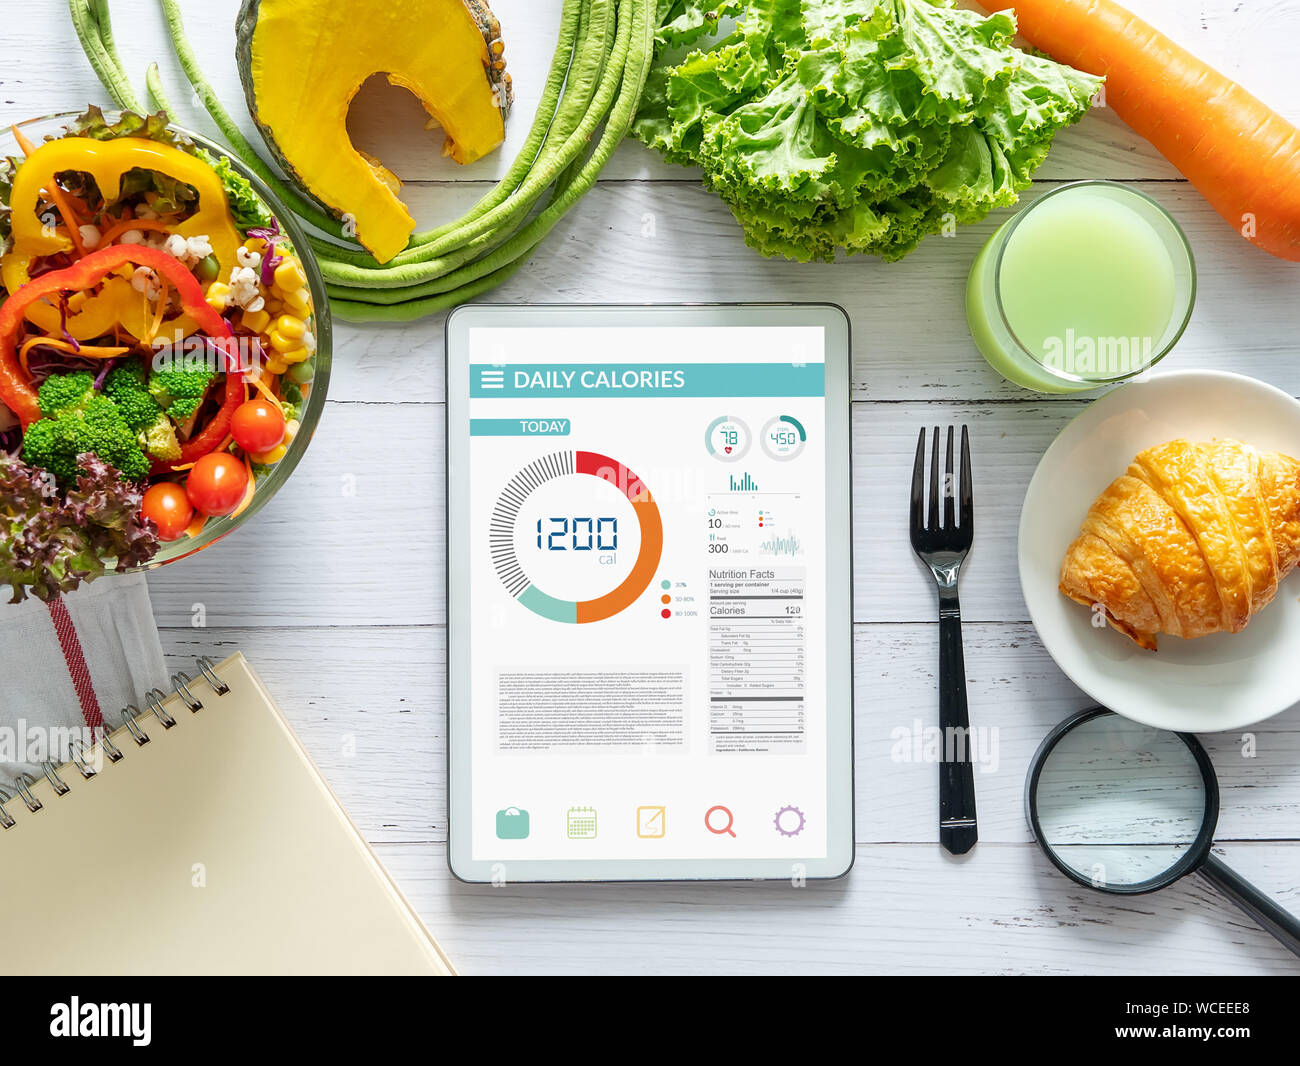 Calories counting , diet , food control and weight loss concept. tablet with Calorie counter application on screen at dining table with salad, fruit j Stock Photo